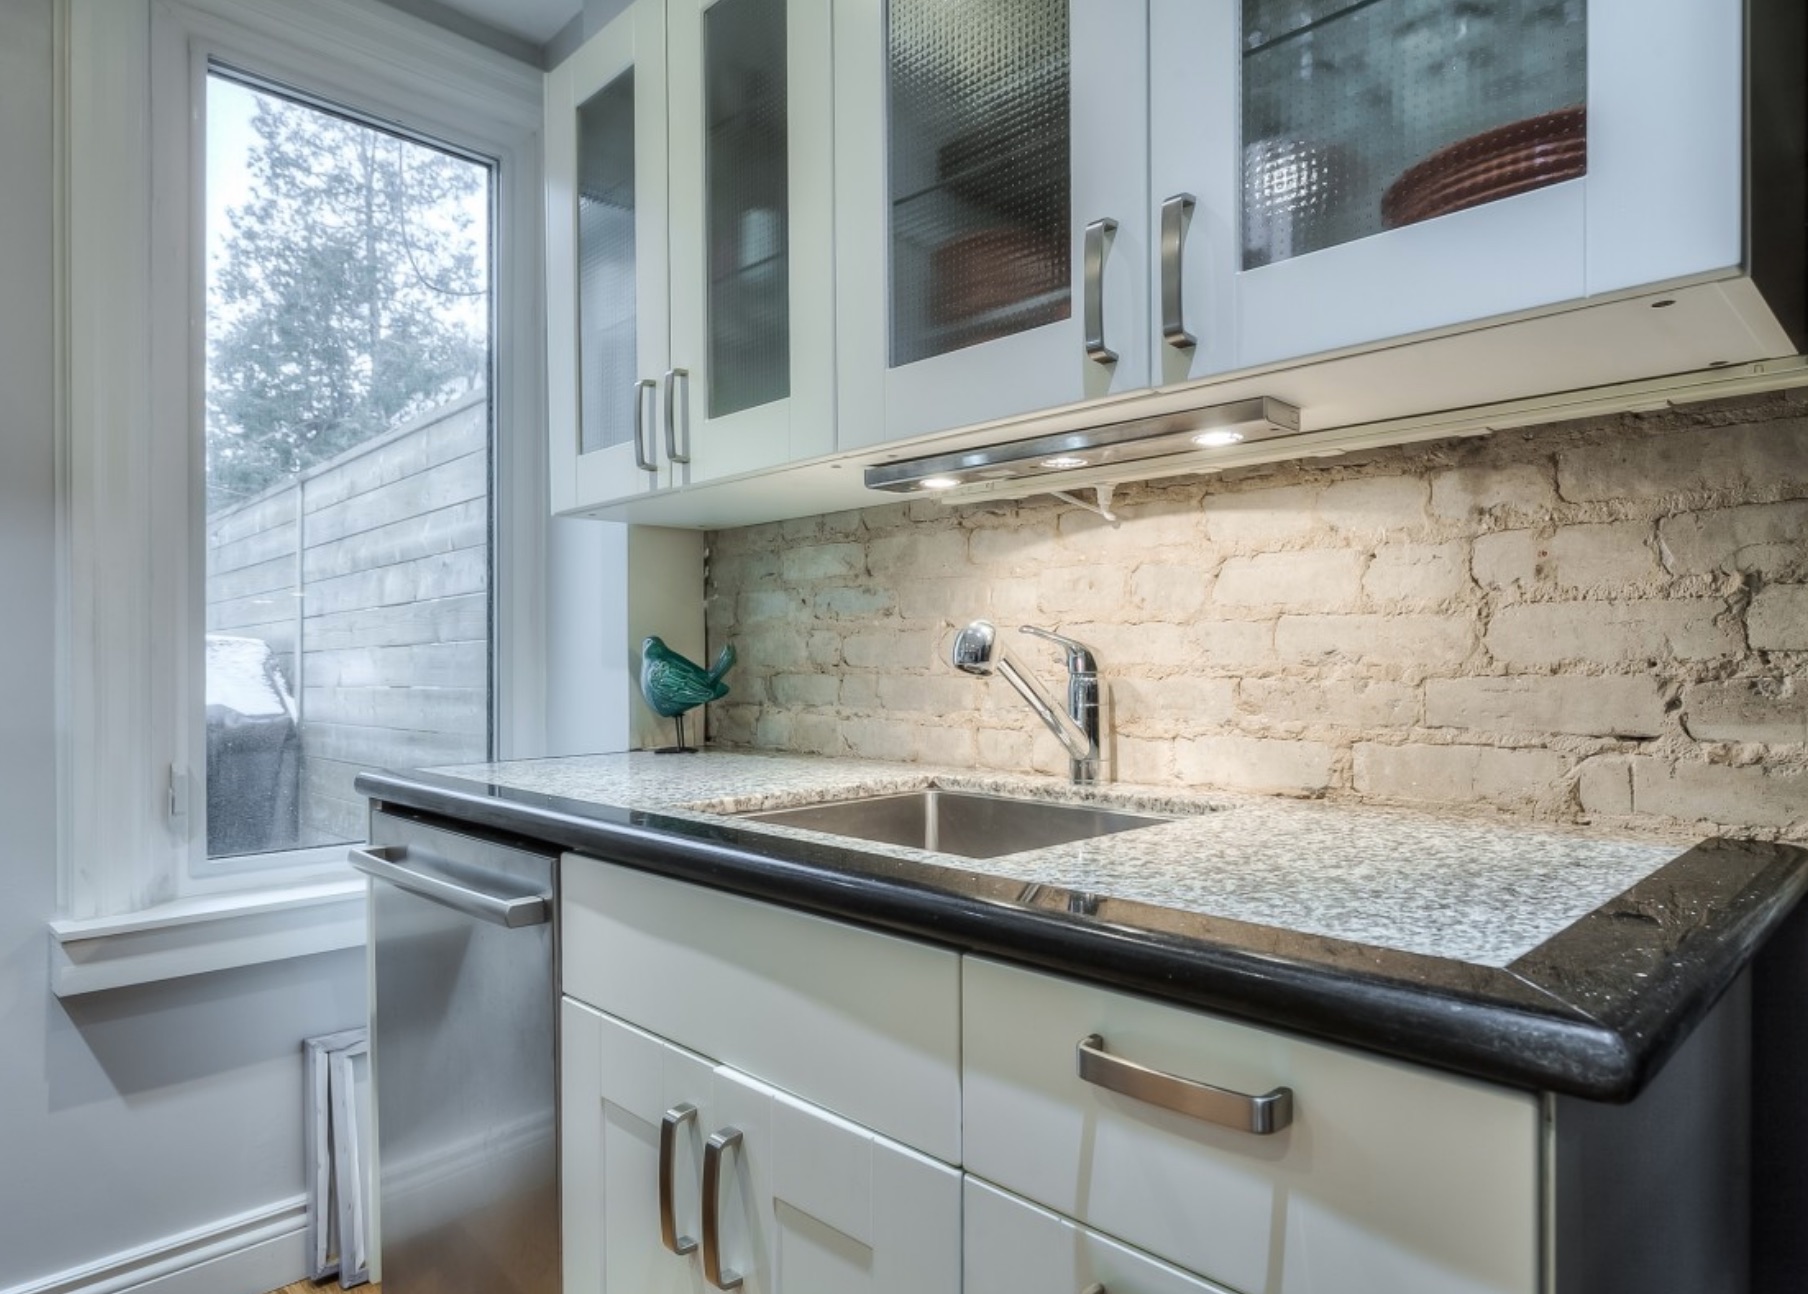 The granite countertop surrounds the sink, with the stainless steel dishwasher located beneath